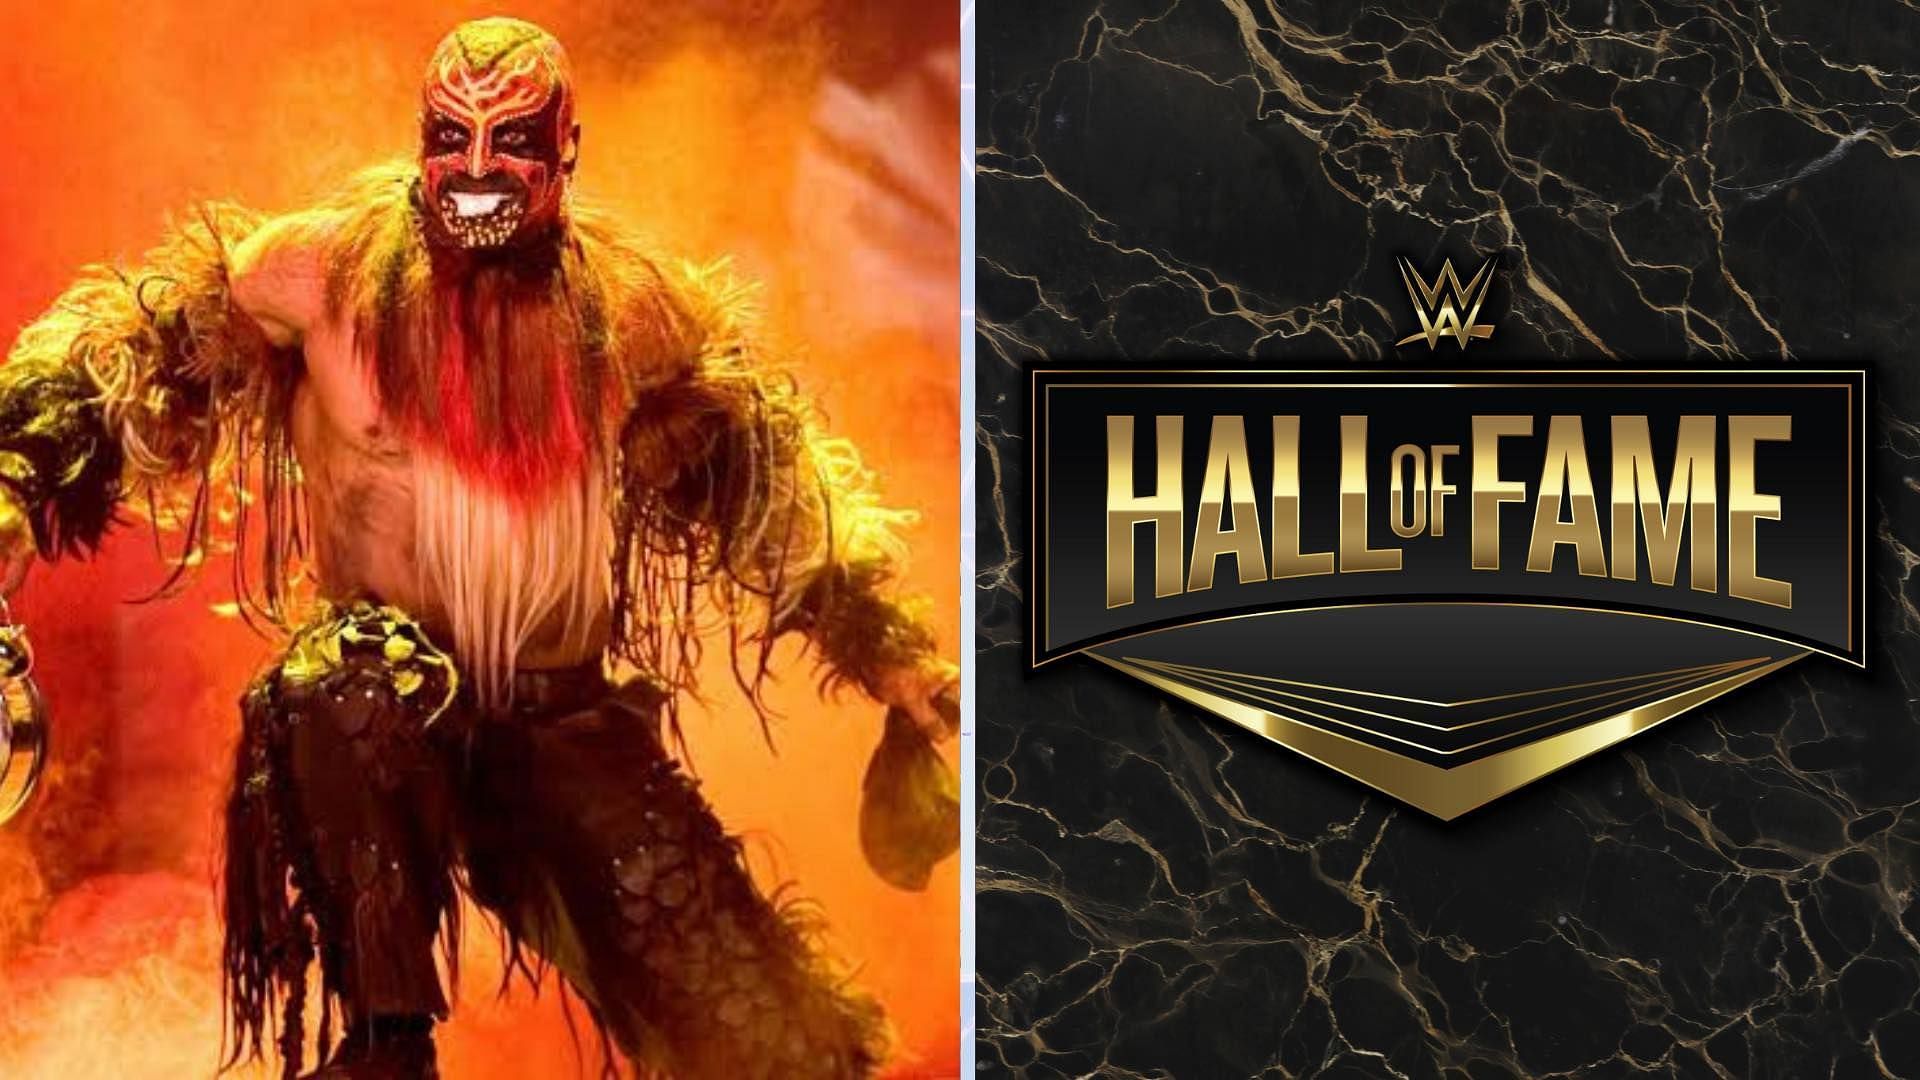 The Boogeyman would look at home in the WWE Hall of Fame!